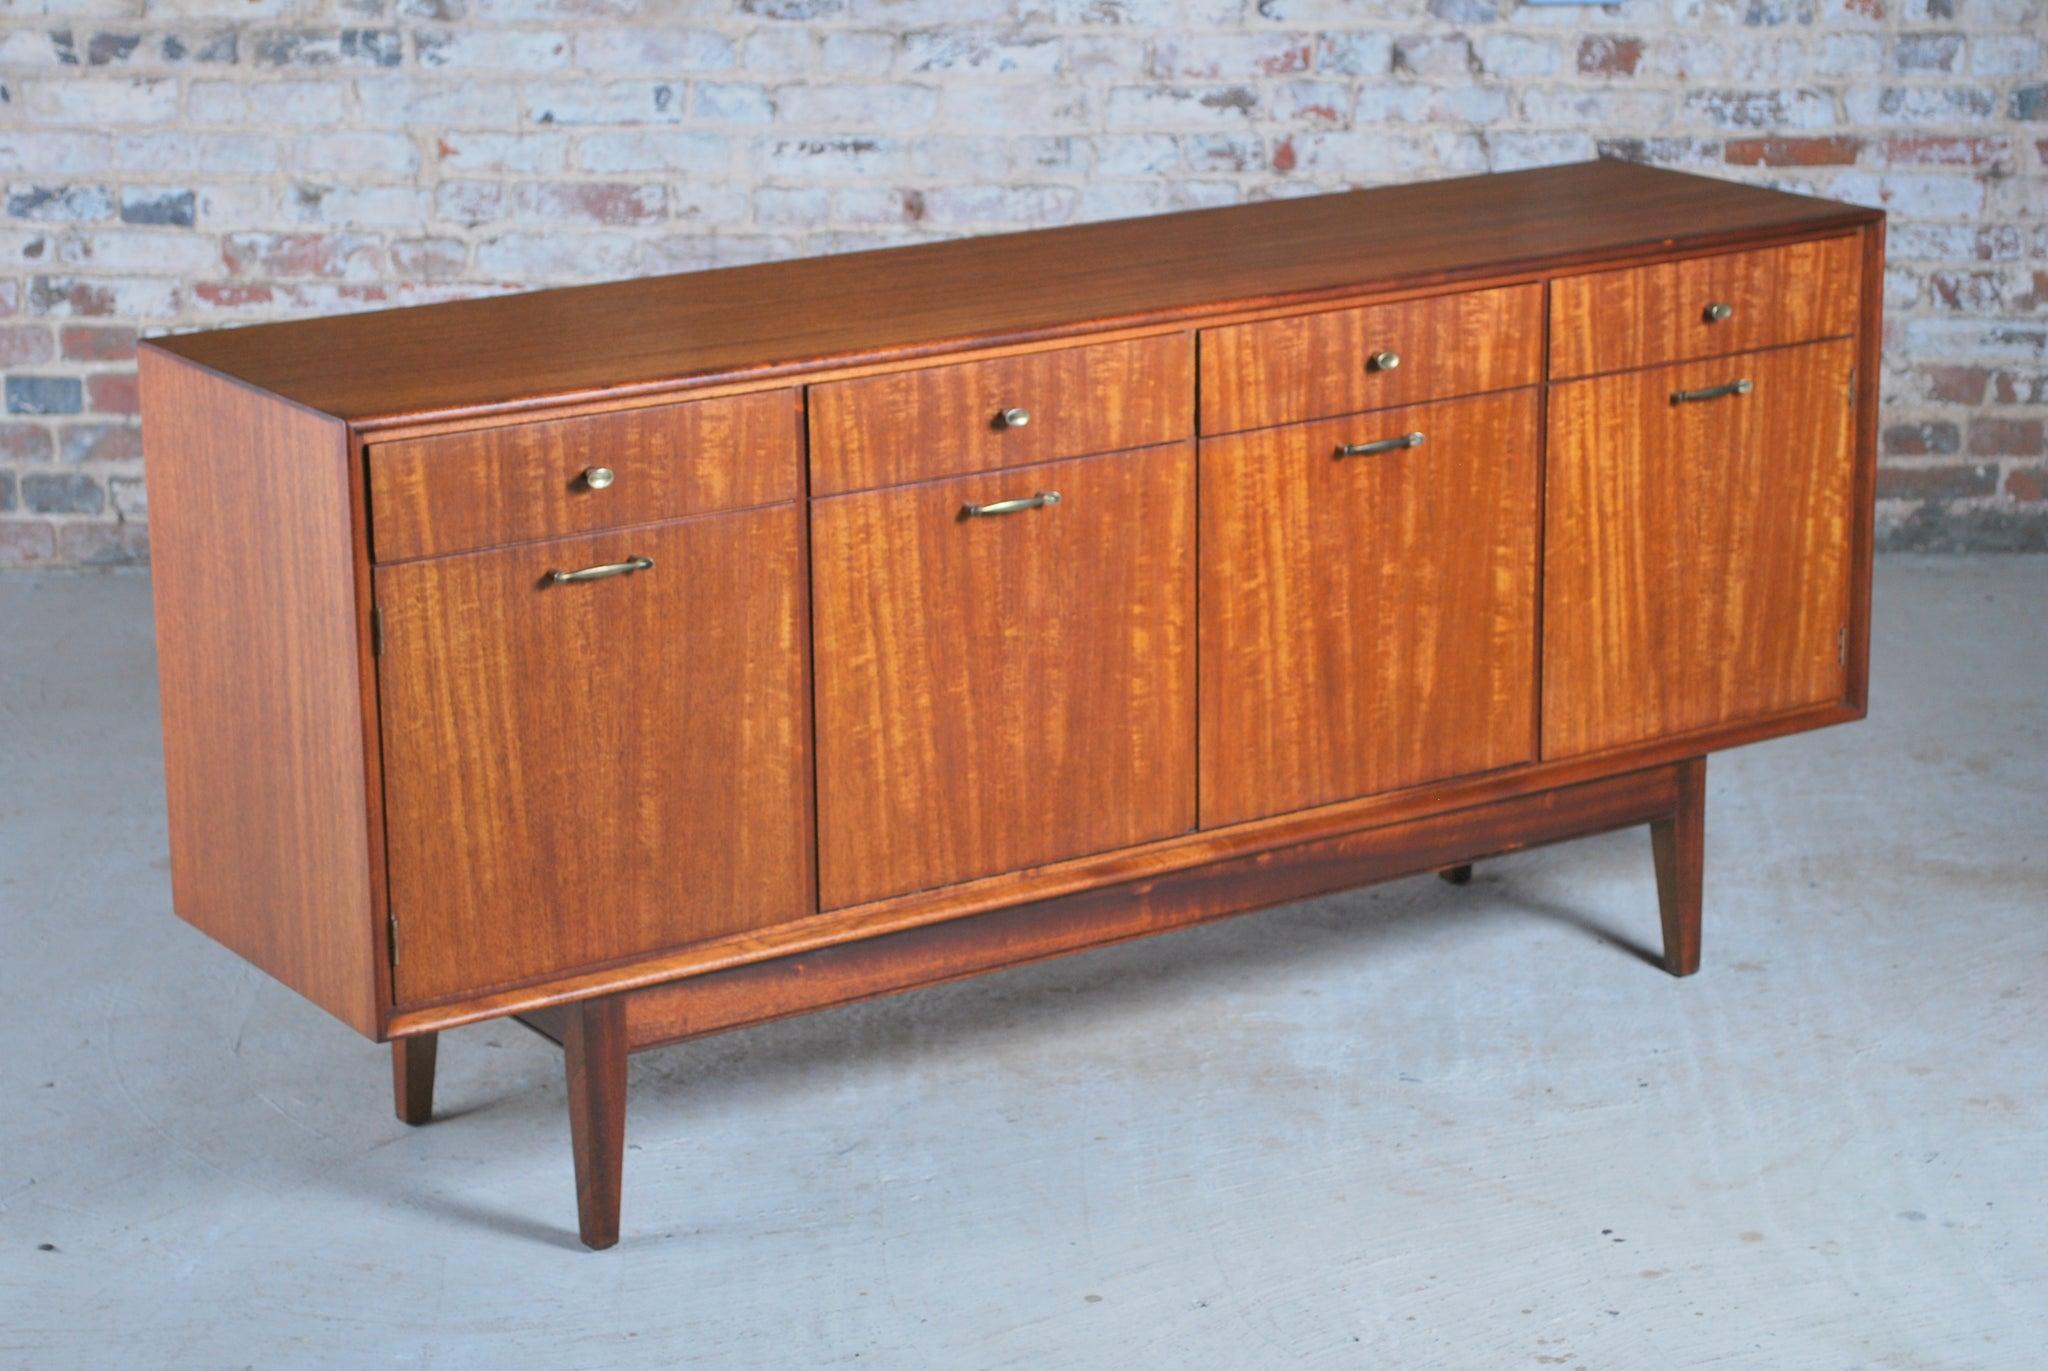 Mid century solid teak sideboard with brass handles by Greaves & Thomas, circa 1960s. 4 drawers, 2 cabinets and a drinks cabinet. Very good restored condition.

Dimension: W 220cm x H 76cm x D 45cm.